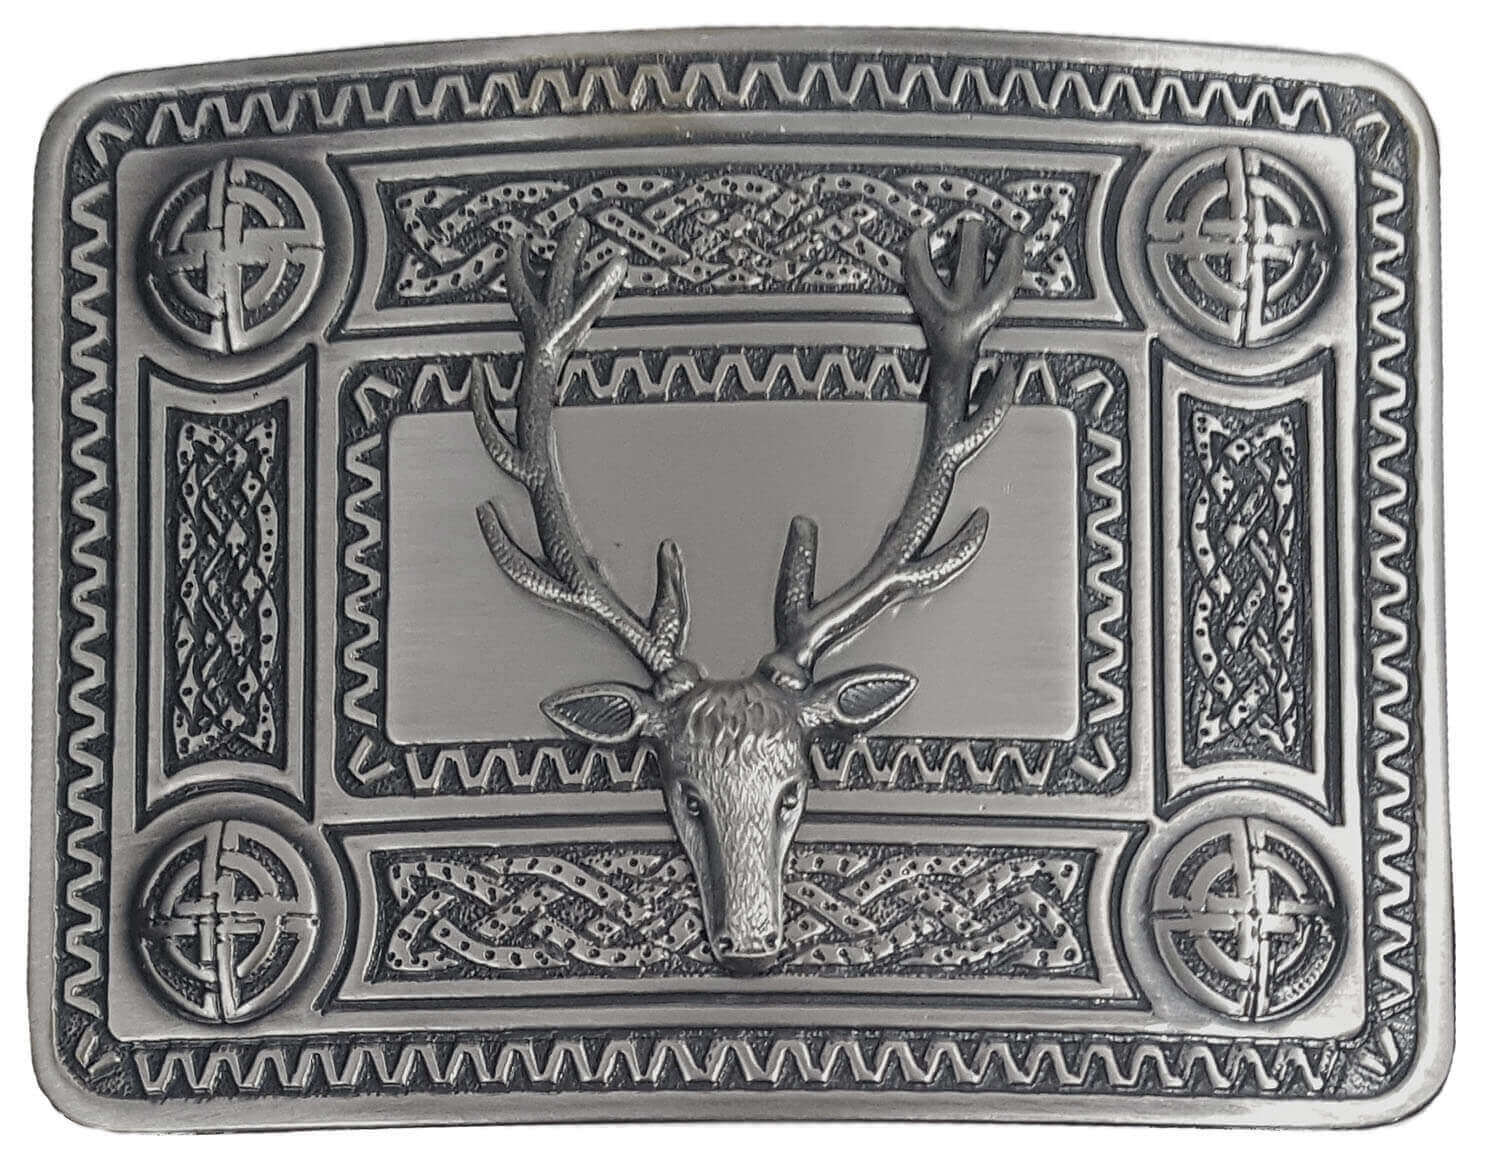 Celtic Knot Kilt Belt Buckle with Stag Mount - Made In Scotland | eBay